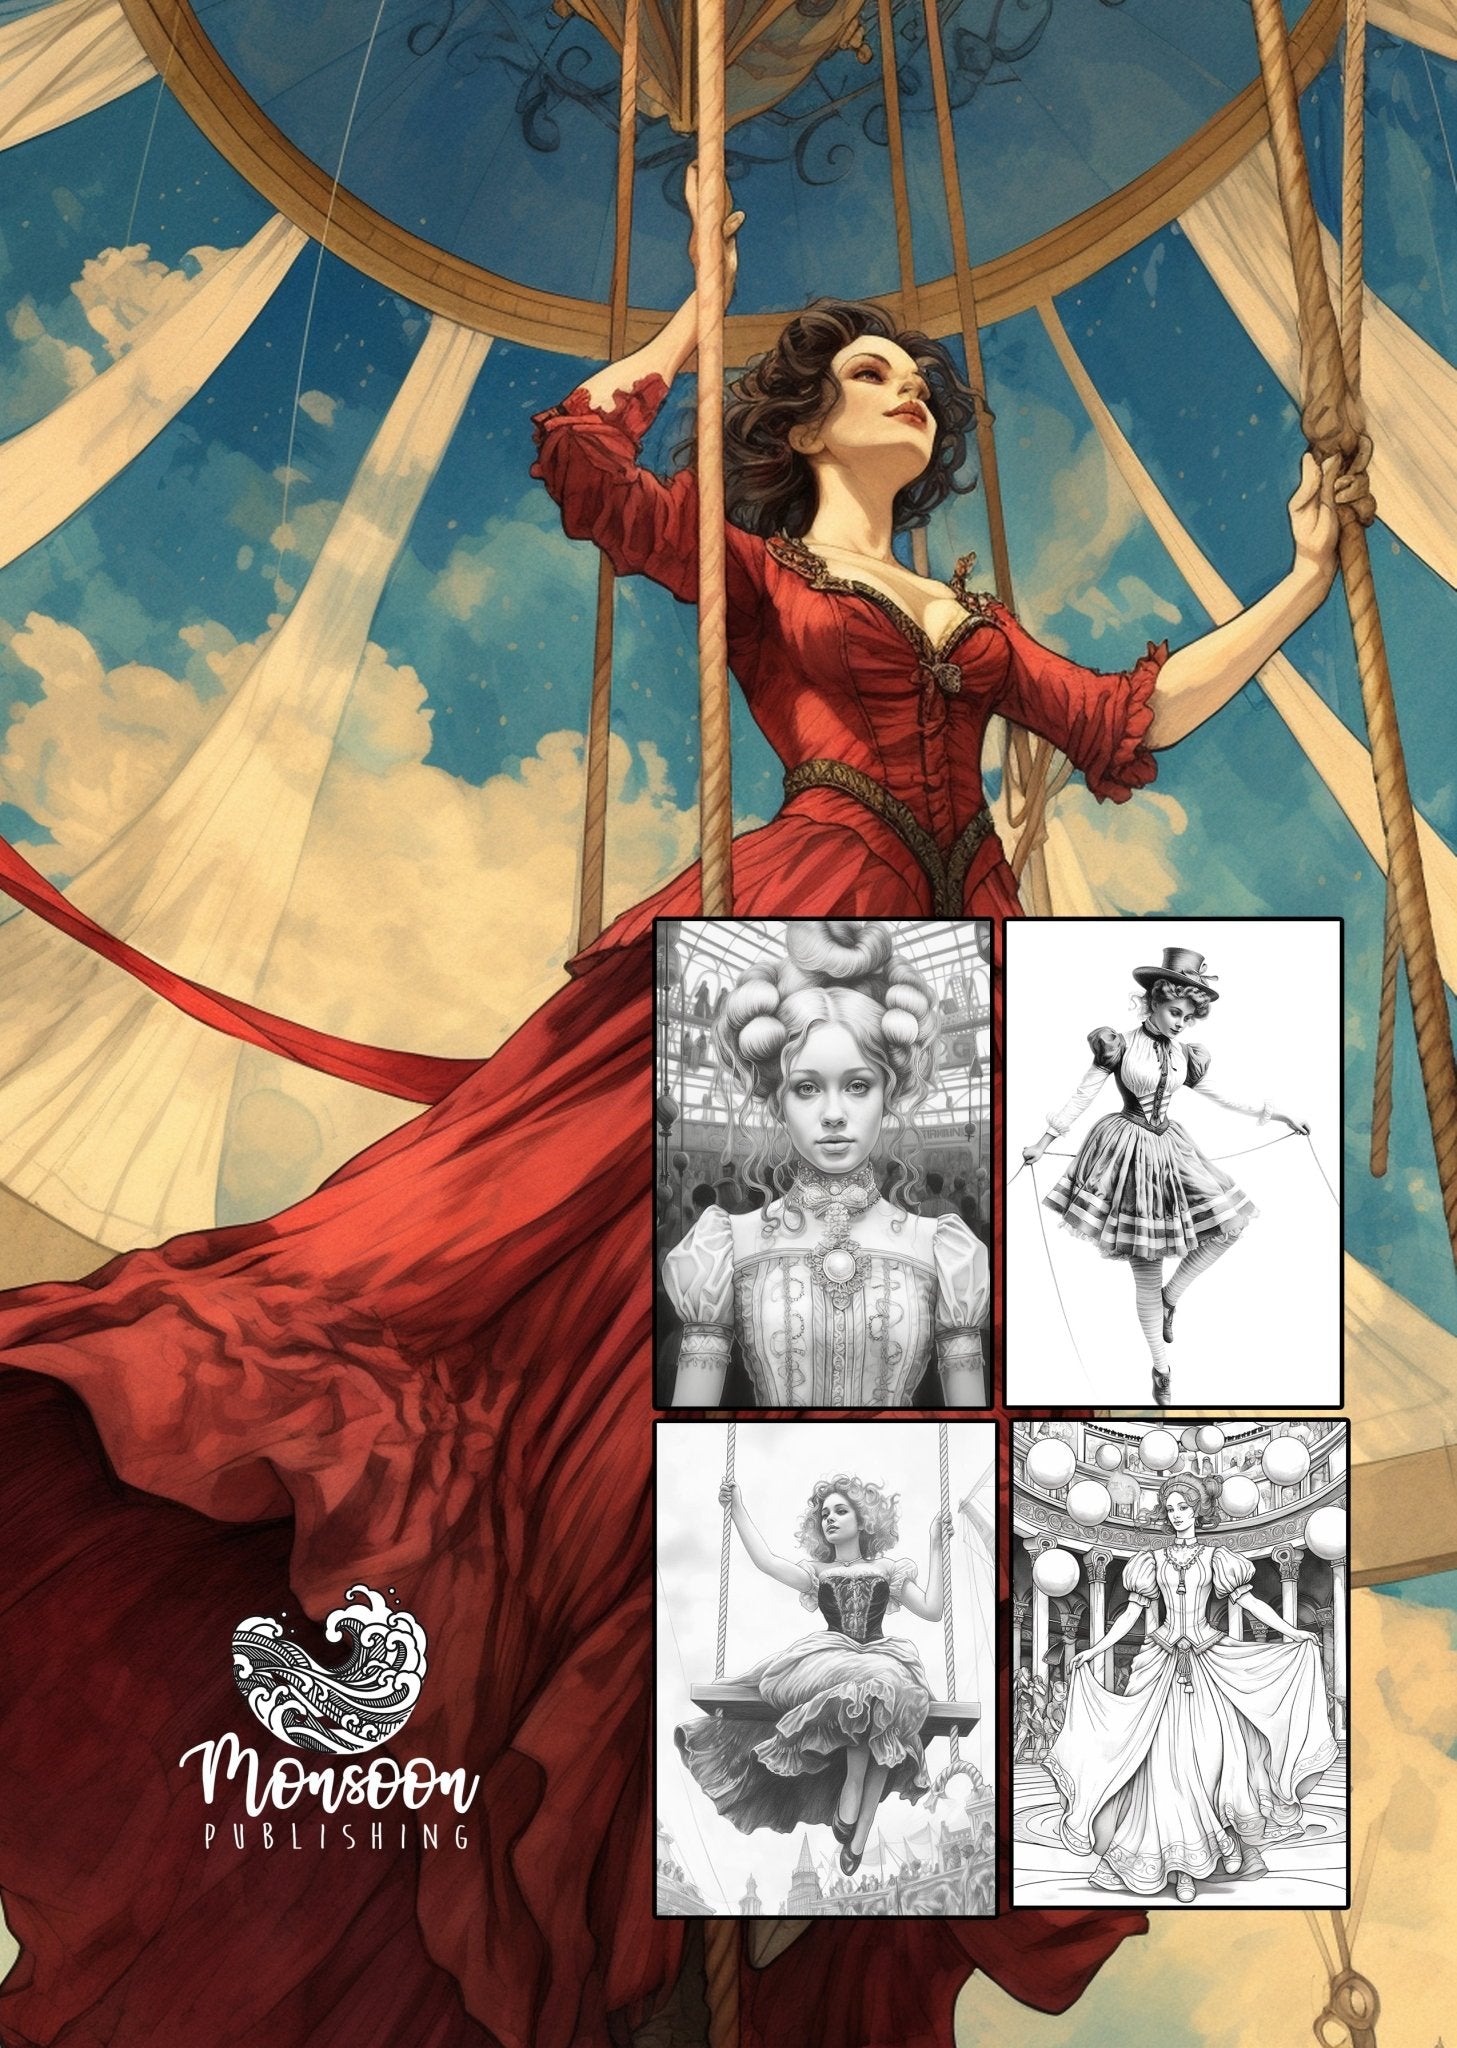 Victorian Circus Coloring Book Grayscale (Digital) - Monsoon Publishing USA